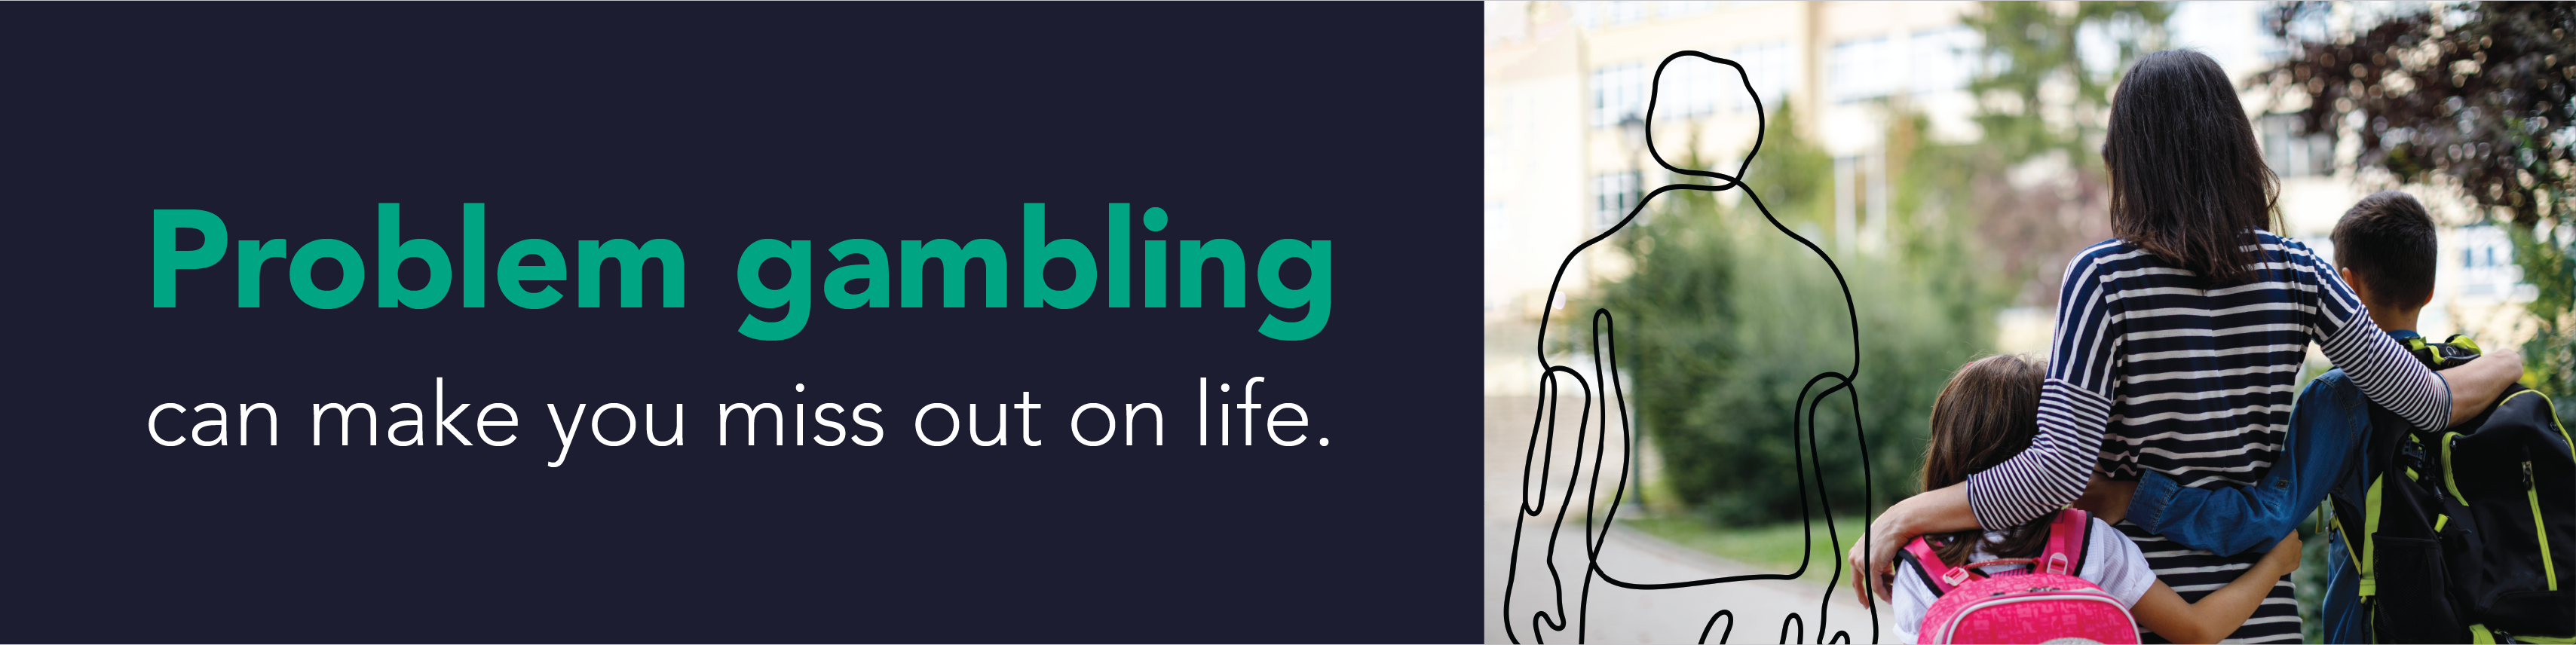 Problem gambling can make you miss out on life